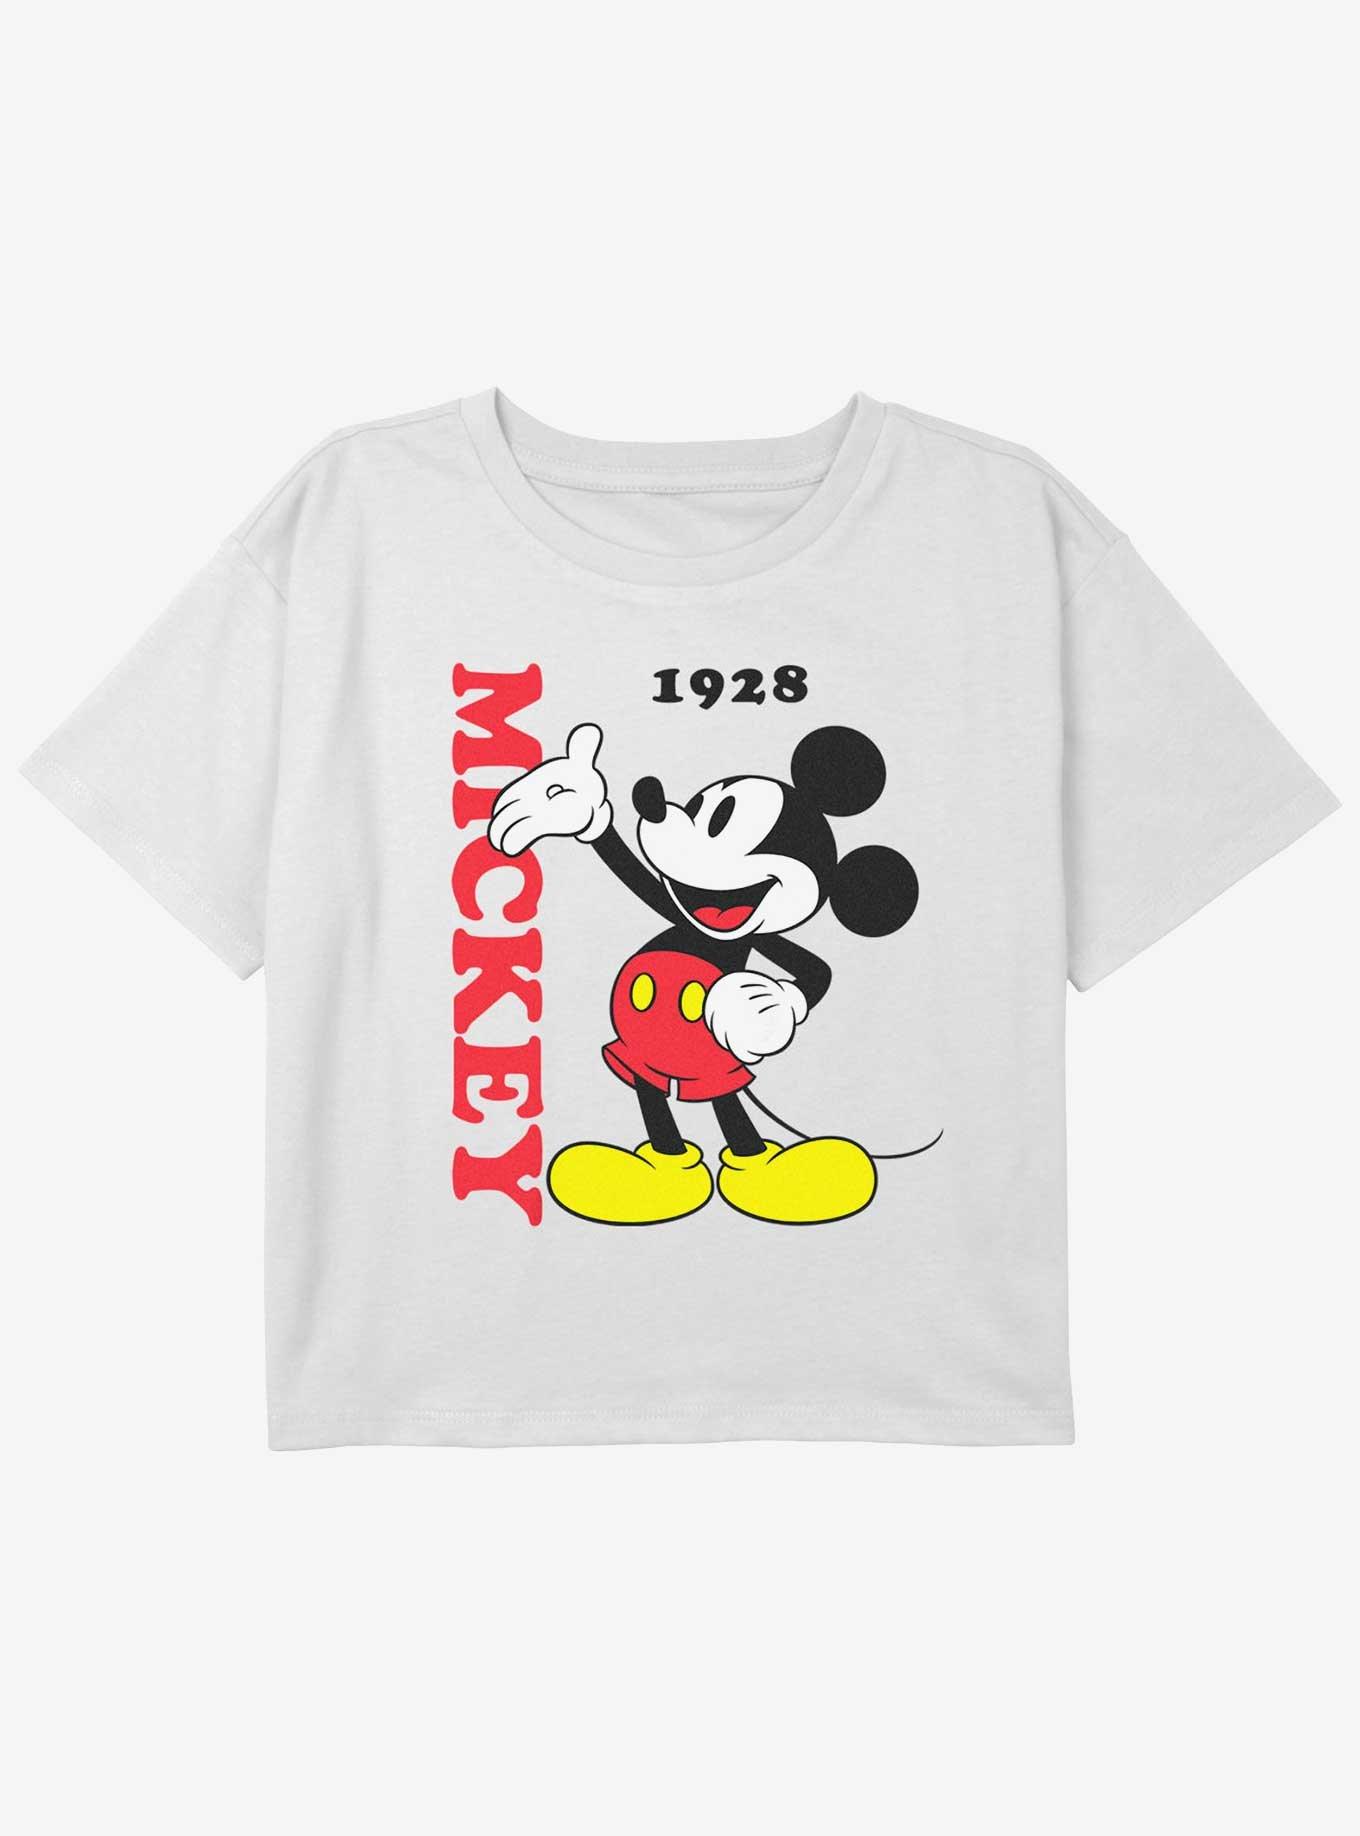 Disney Mickey Mouse Mickey Wave Girls Youth Crop T-Shirt, WHITE, hi-res